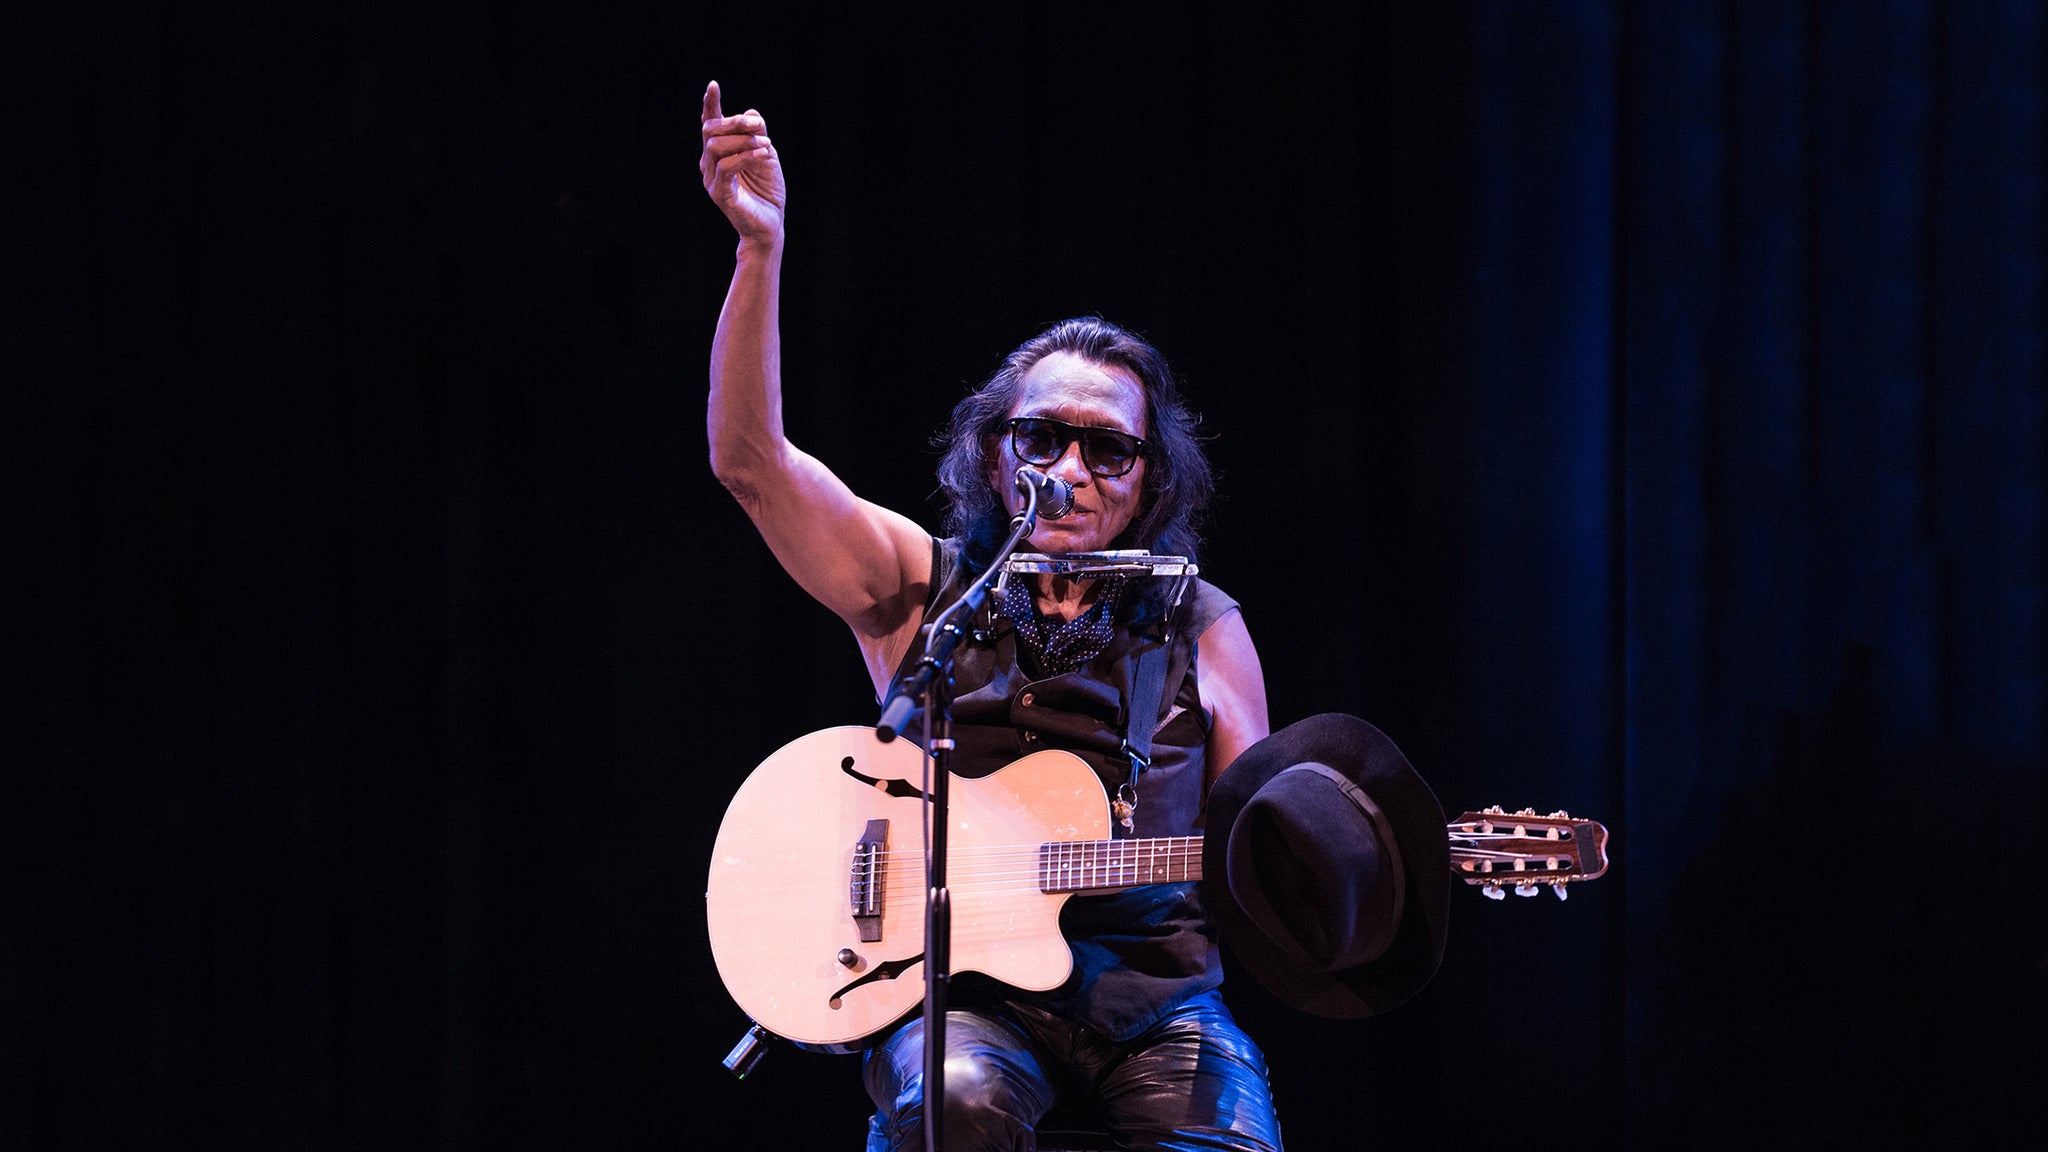 Rodriguez in Calgary promo photo for LIve Nation Mobile App presale offer code